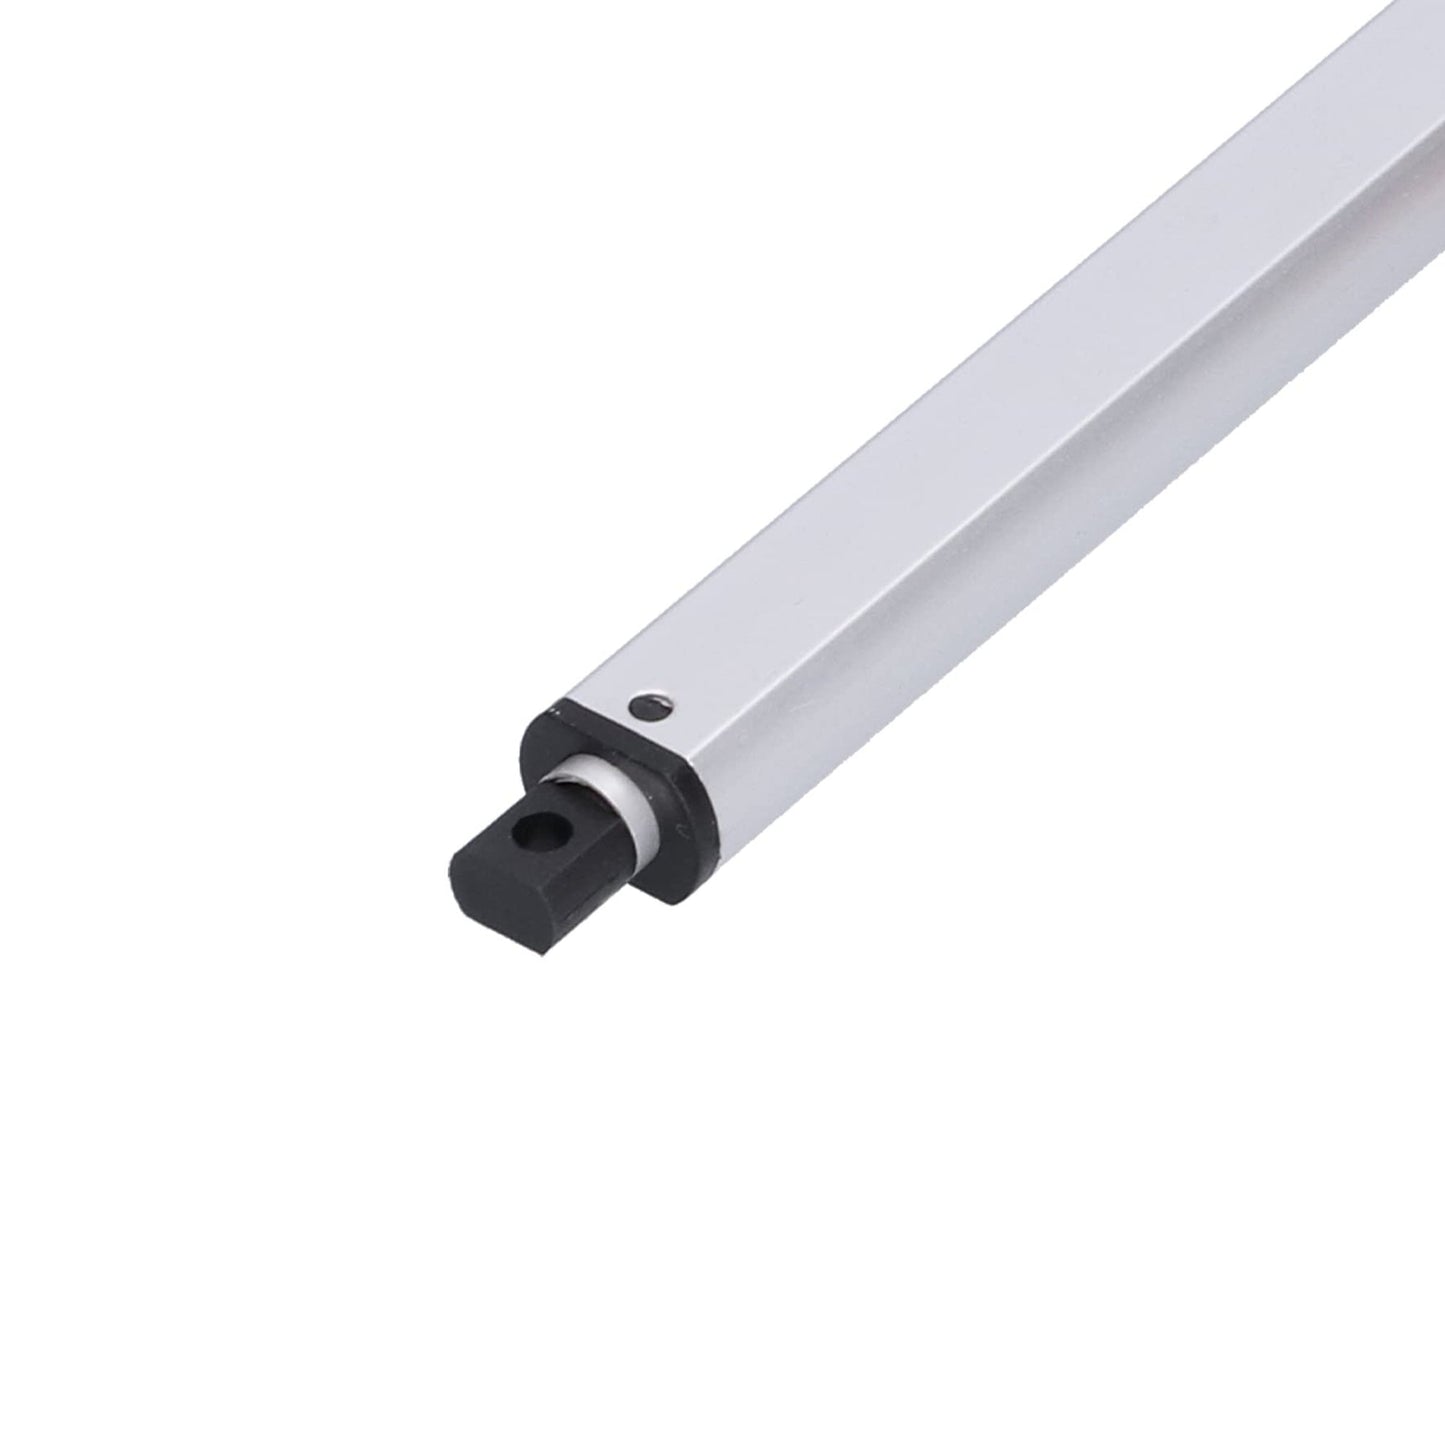 100mm-30mm/s Linear Motion Actuator 20N